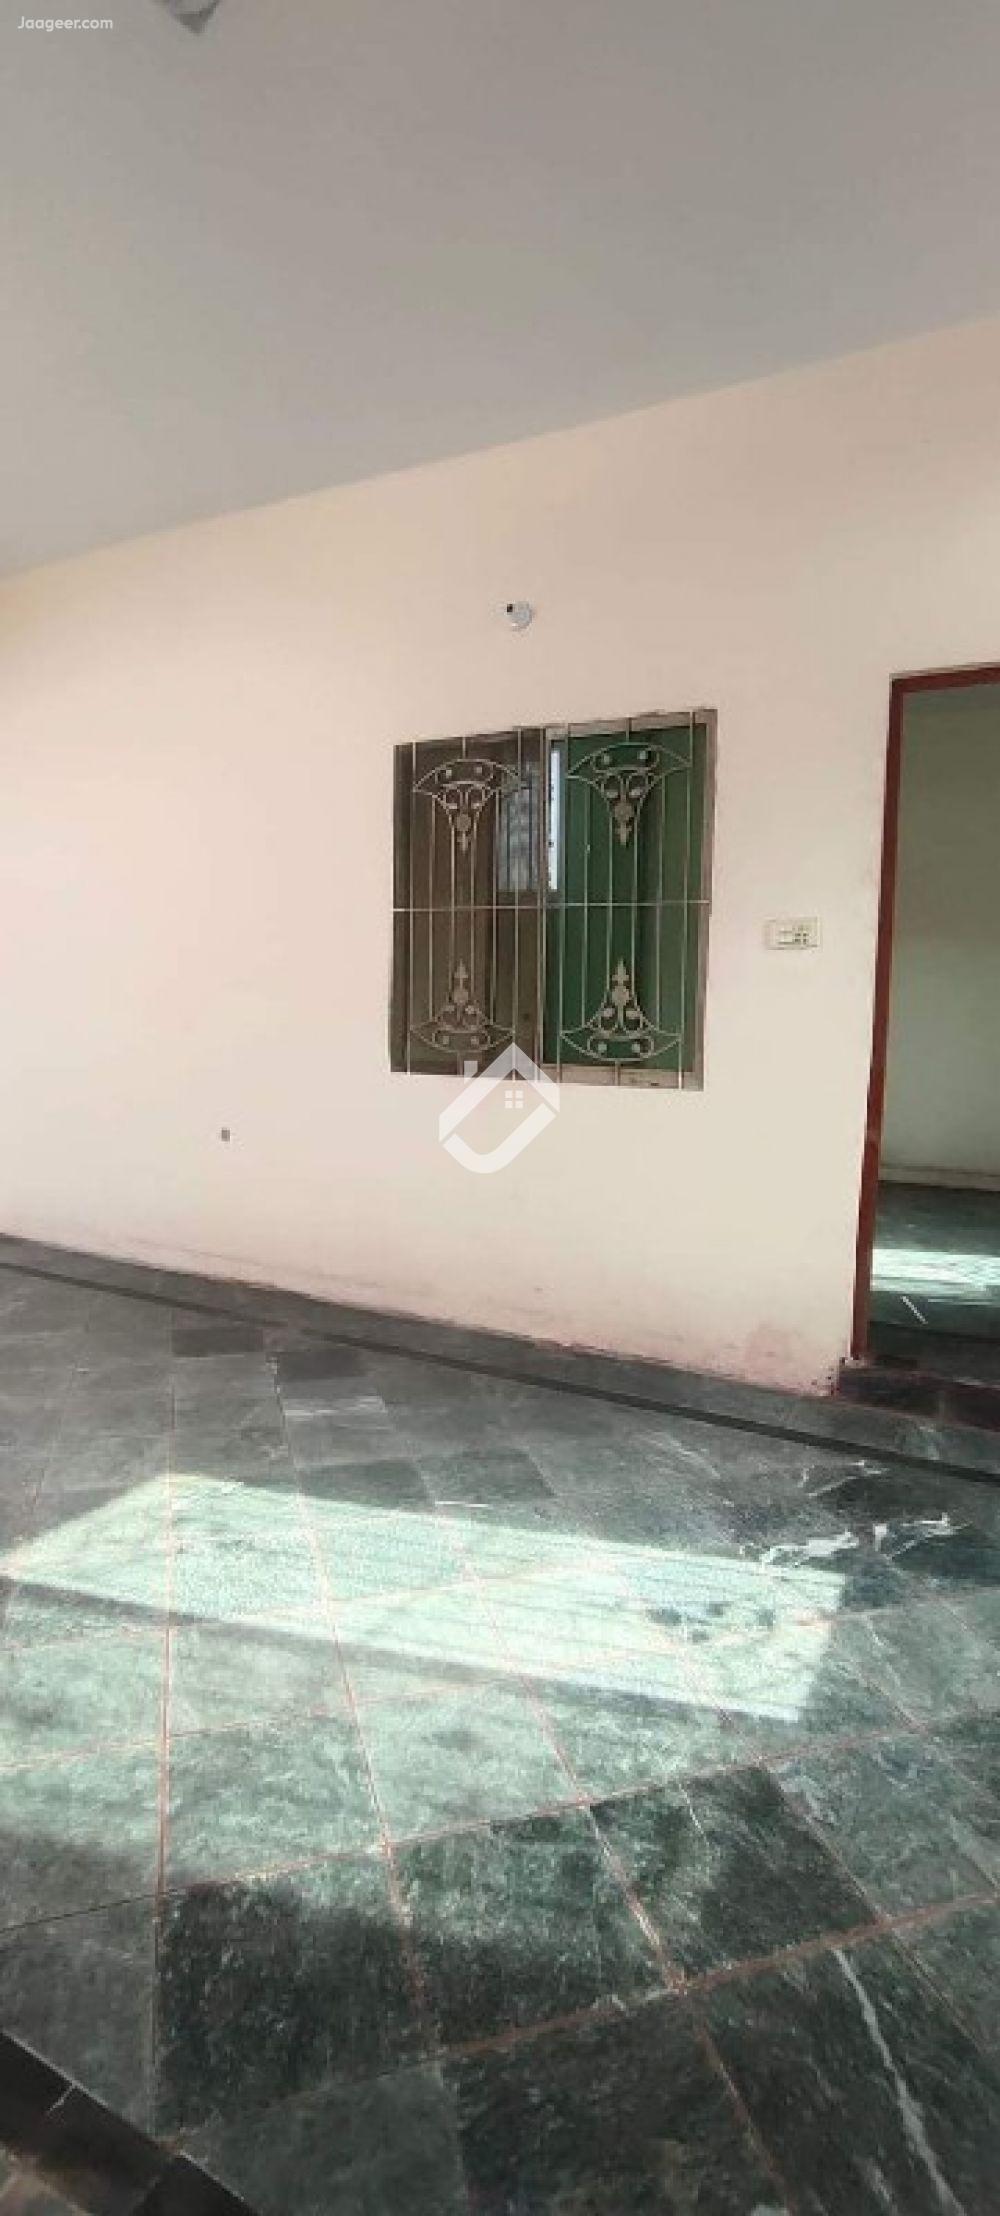 View  5 Marla Corner House Is For Sale In Araianwala Pulli Stop in Araian Wala Pulli Stop, Sheikhupura